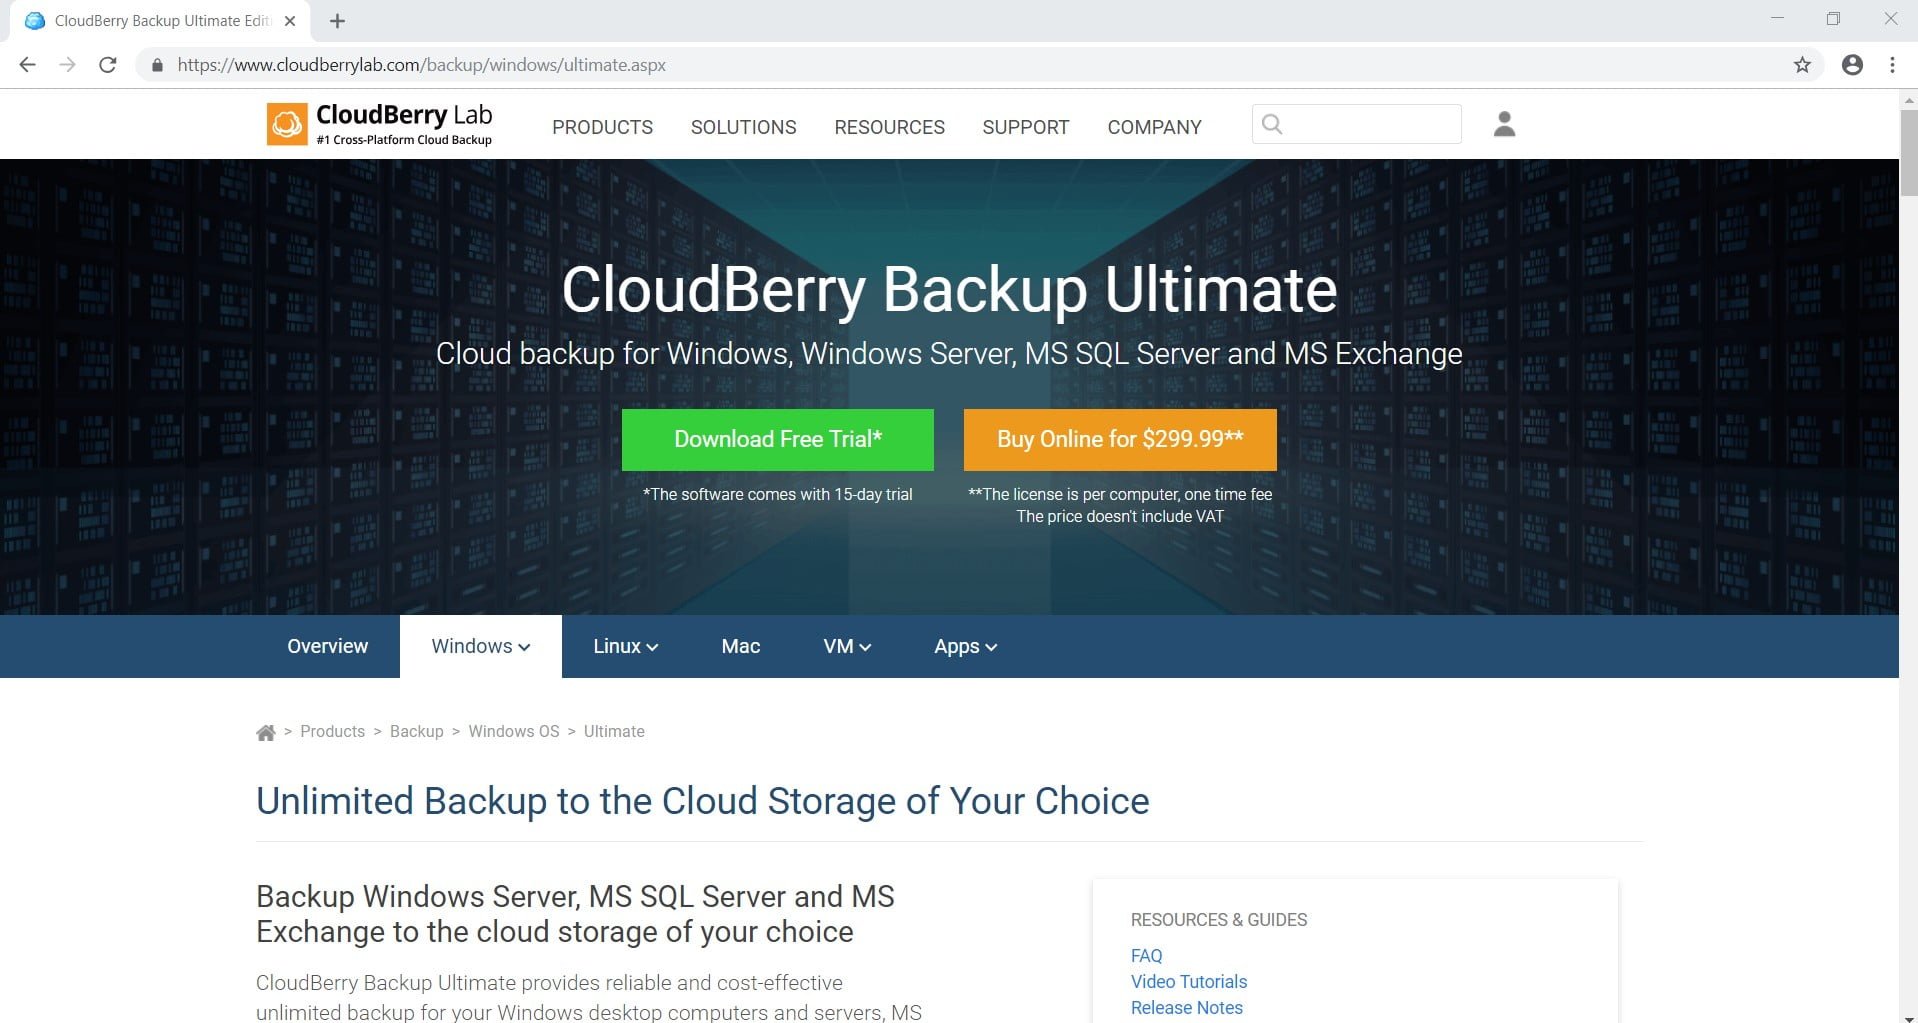 cloudberry backup losts folder issues